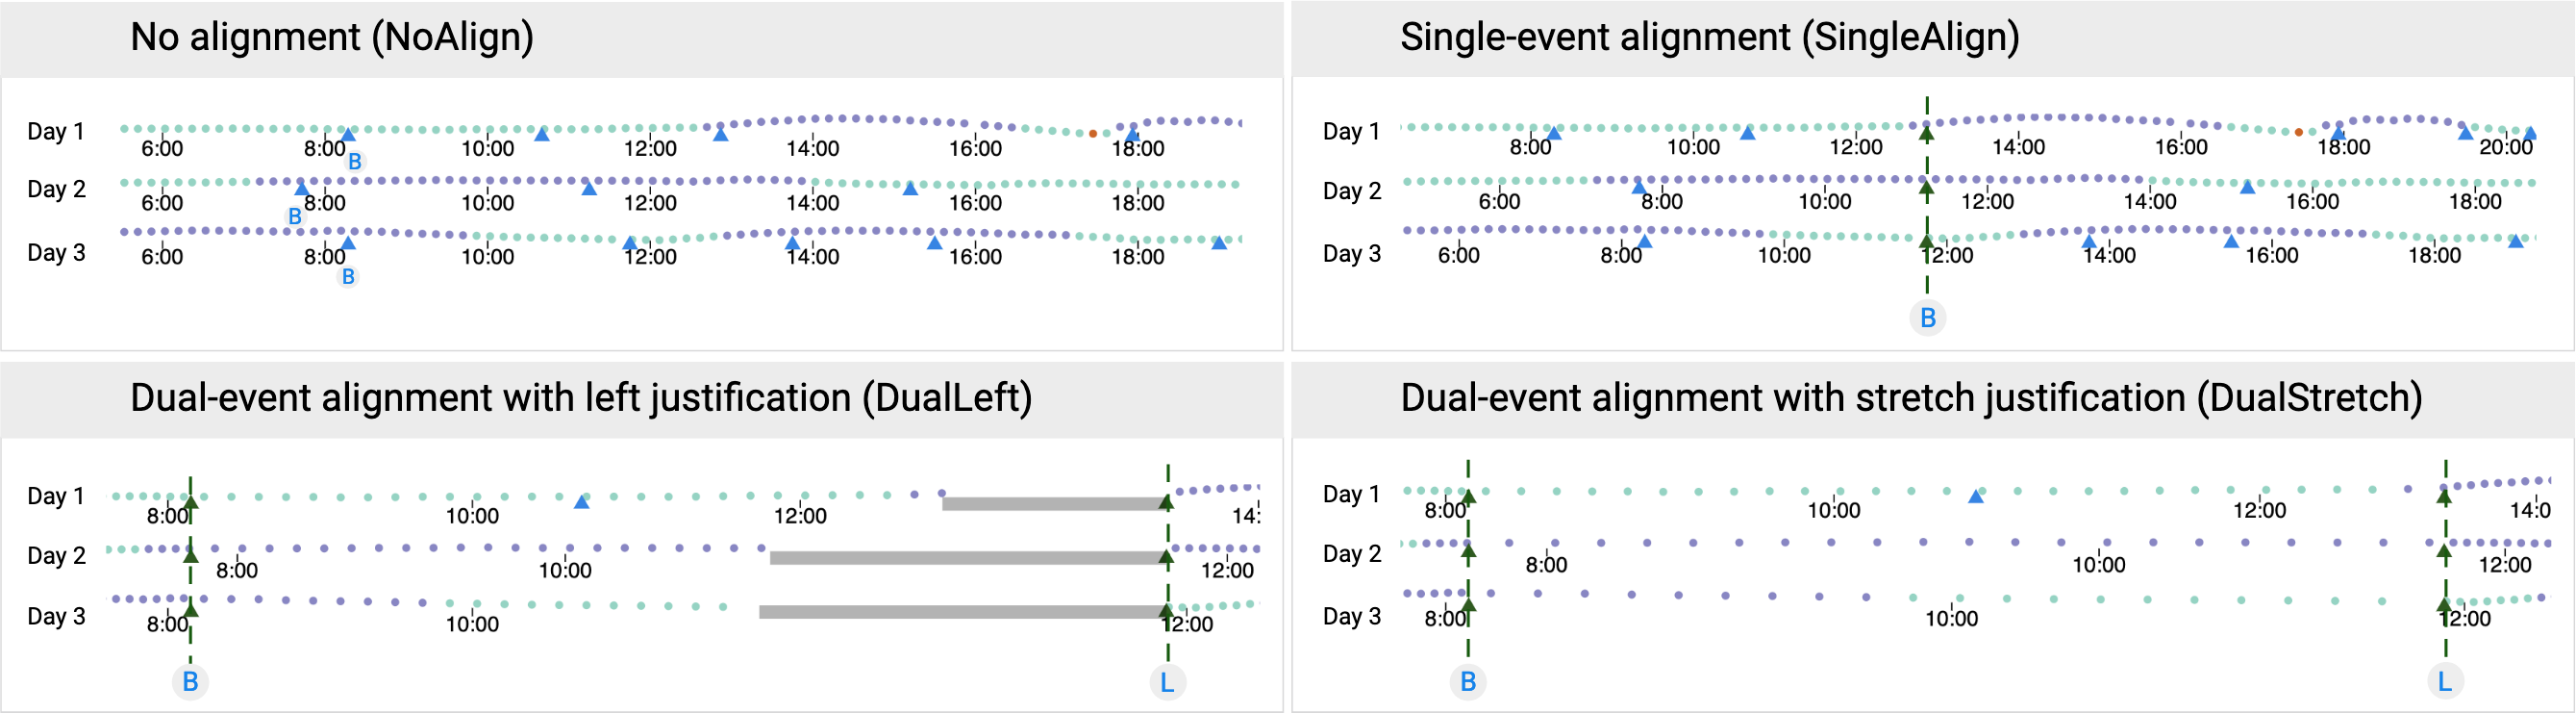 Comparison of the different alignment methods taken into account in the paper: No Alignment, Single-event Alignment, Dual-event Alignment with left justification and Dual-event Alignment with stretch justification.